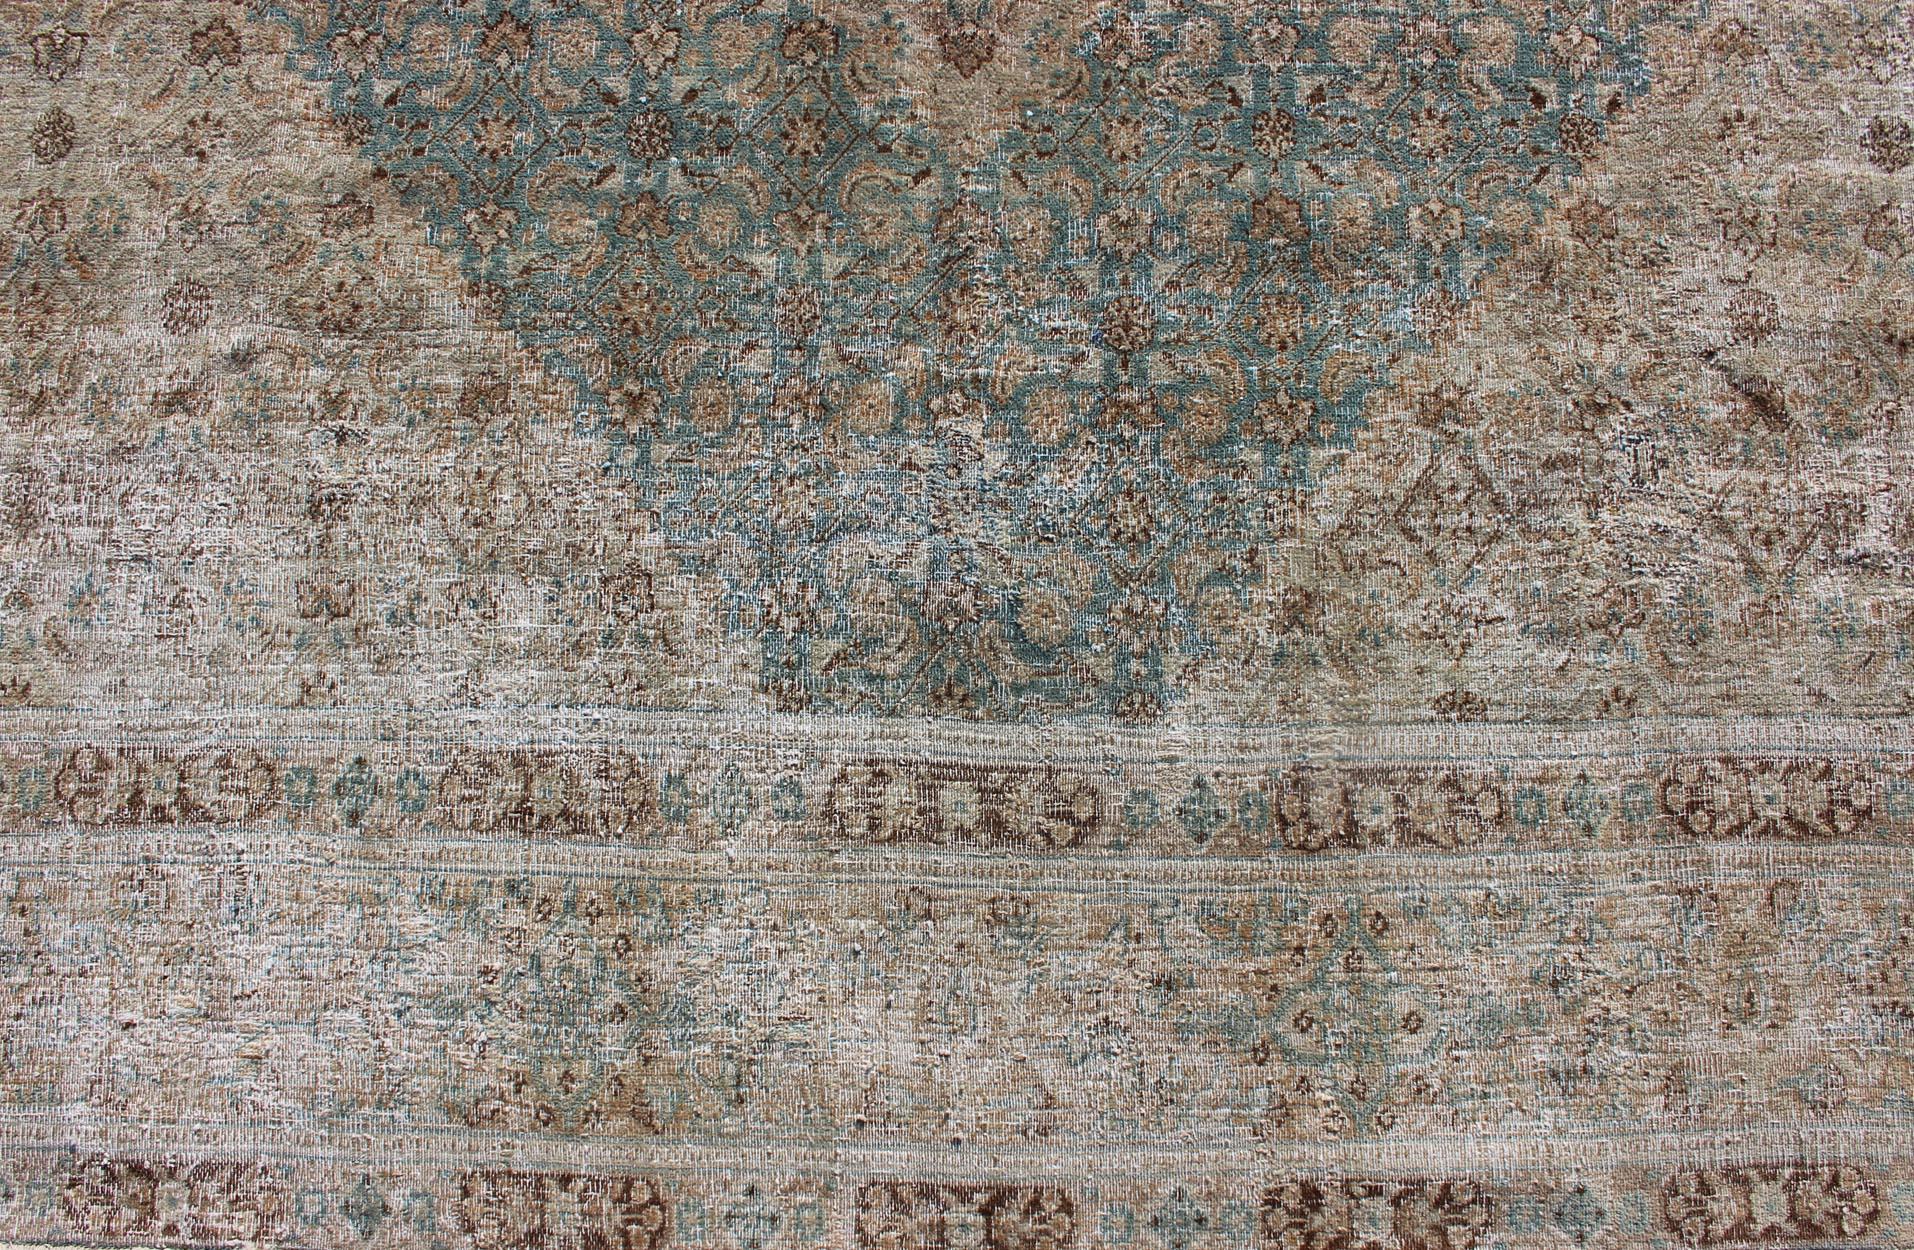 Early 20th Century Antique Persian Khorassan Rug with a Geometric Diamond Design in Teal and Brown For Sale